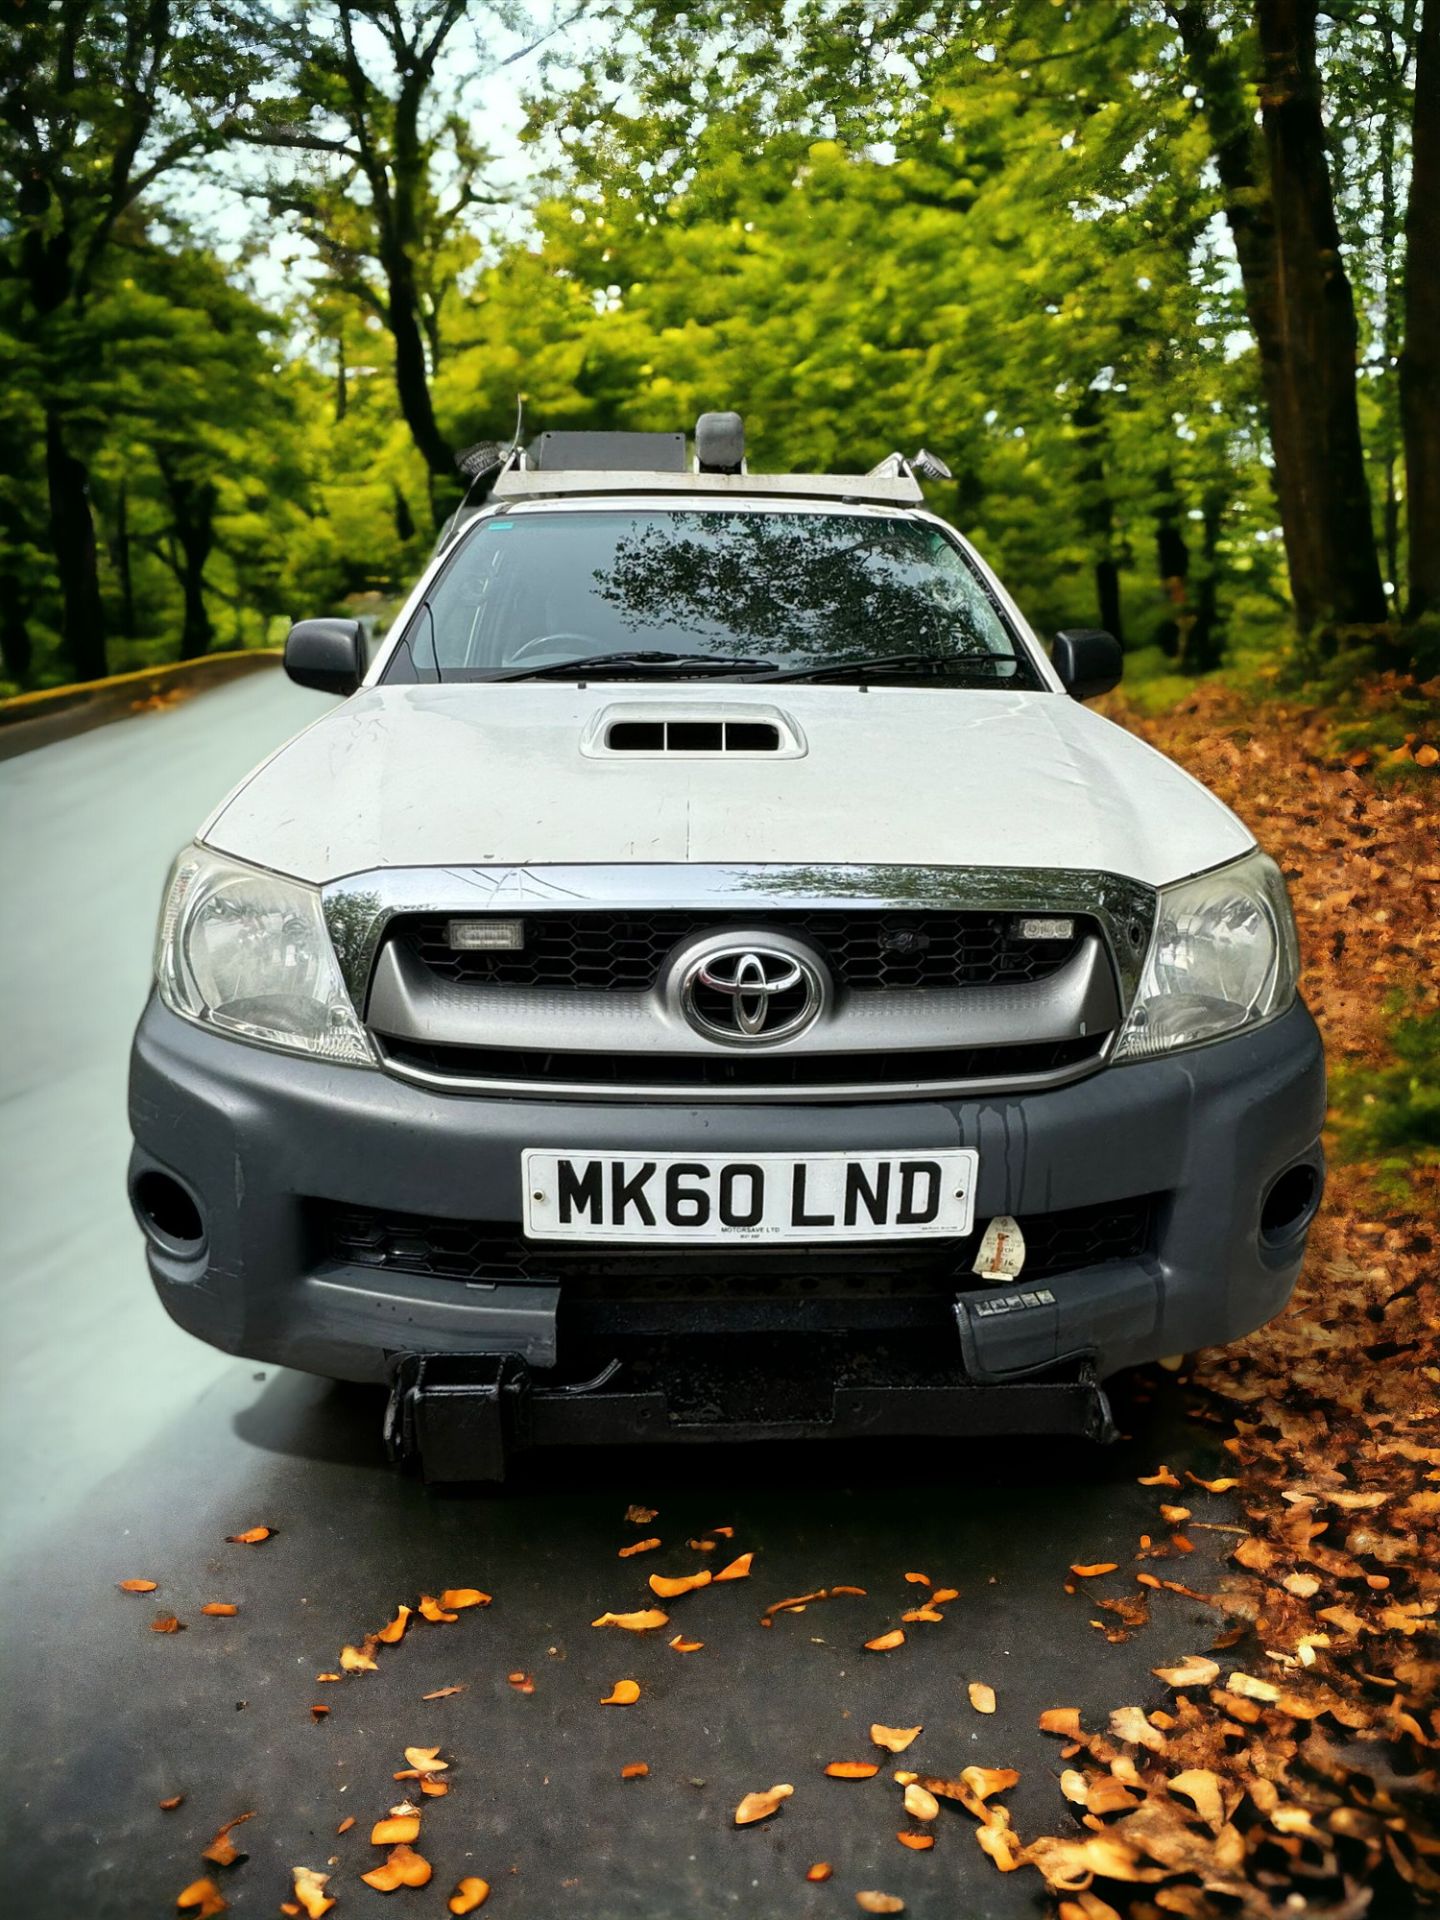 2010 TOYOTA HILUX KING CAB PICKUP TRUCK - READY FOR ANY ADVENTURE! - Image 8 of 15